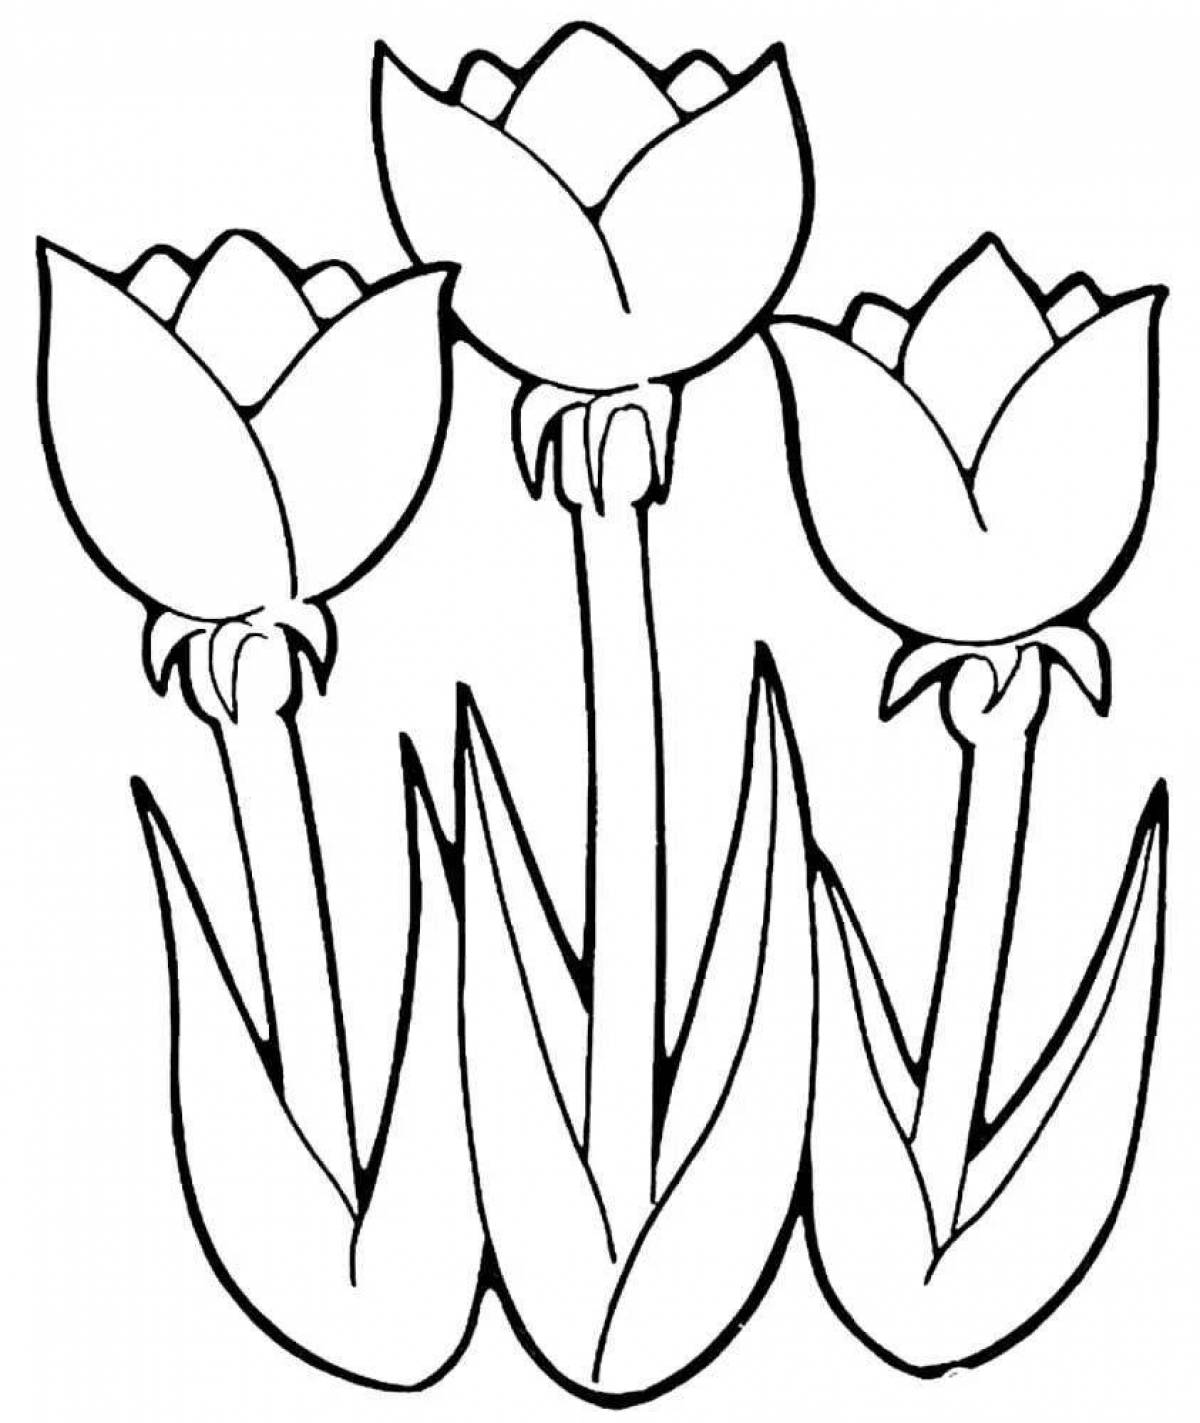 Coloring page amazing spring tulips